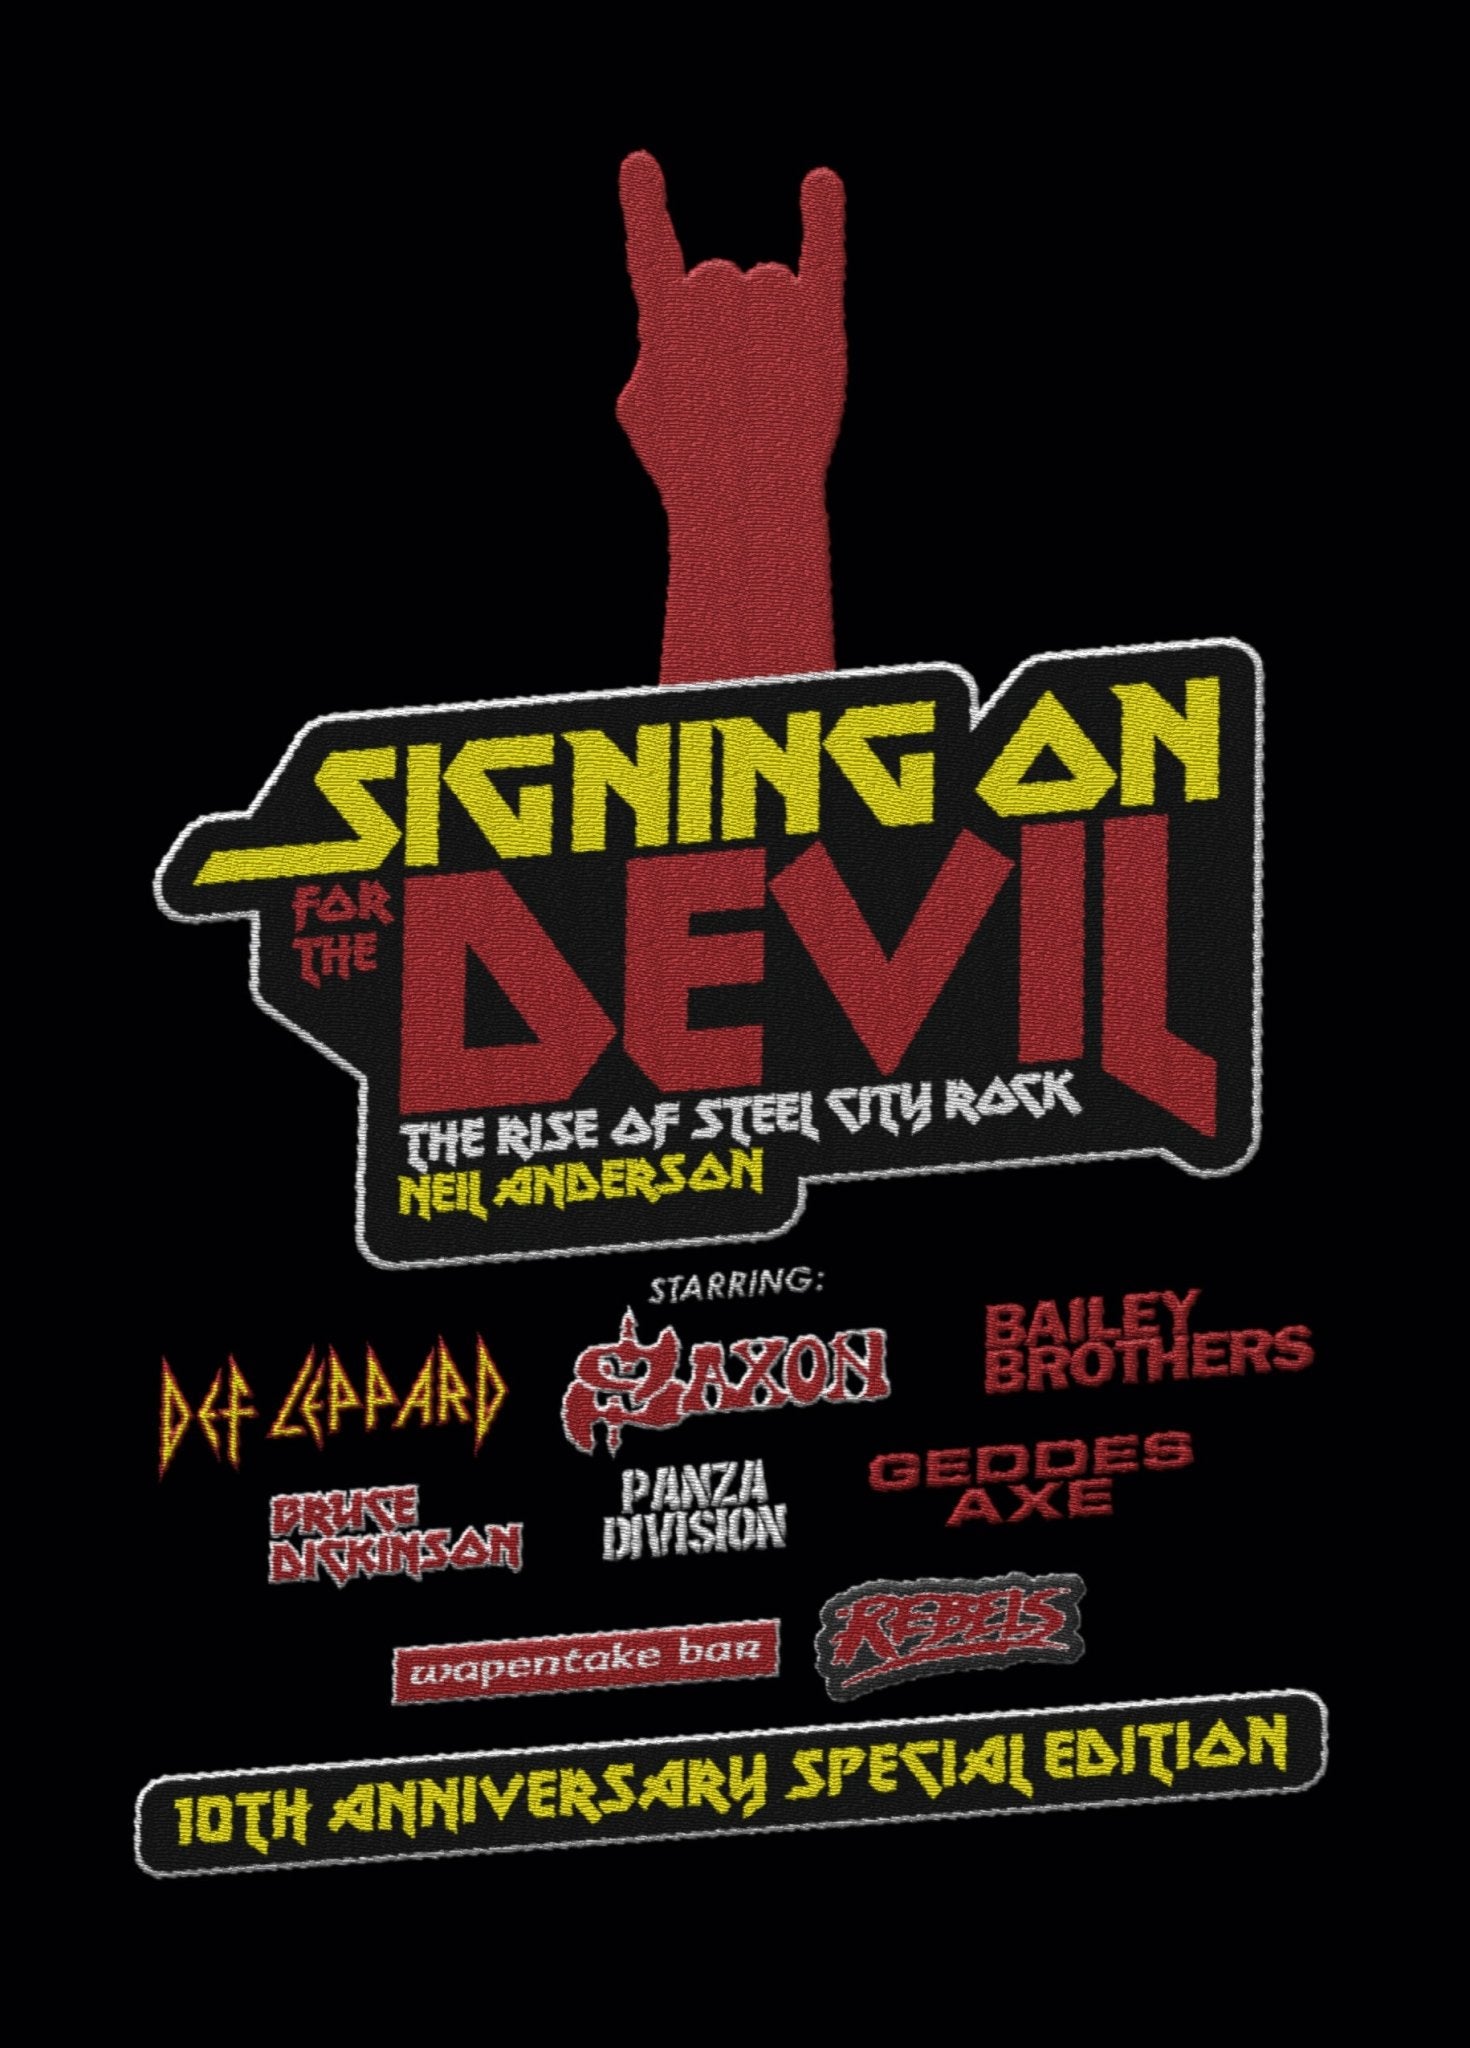 Signing On For The Devil - The Rise of Steel City Rock - 10th anniversary collector's edition - Dirty Stop Outs